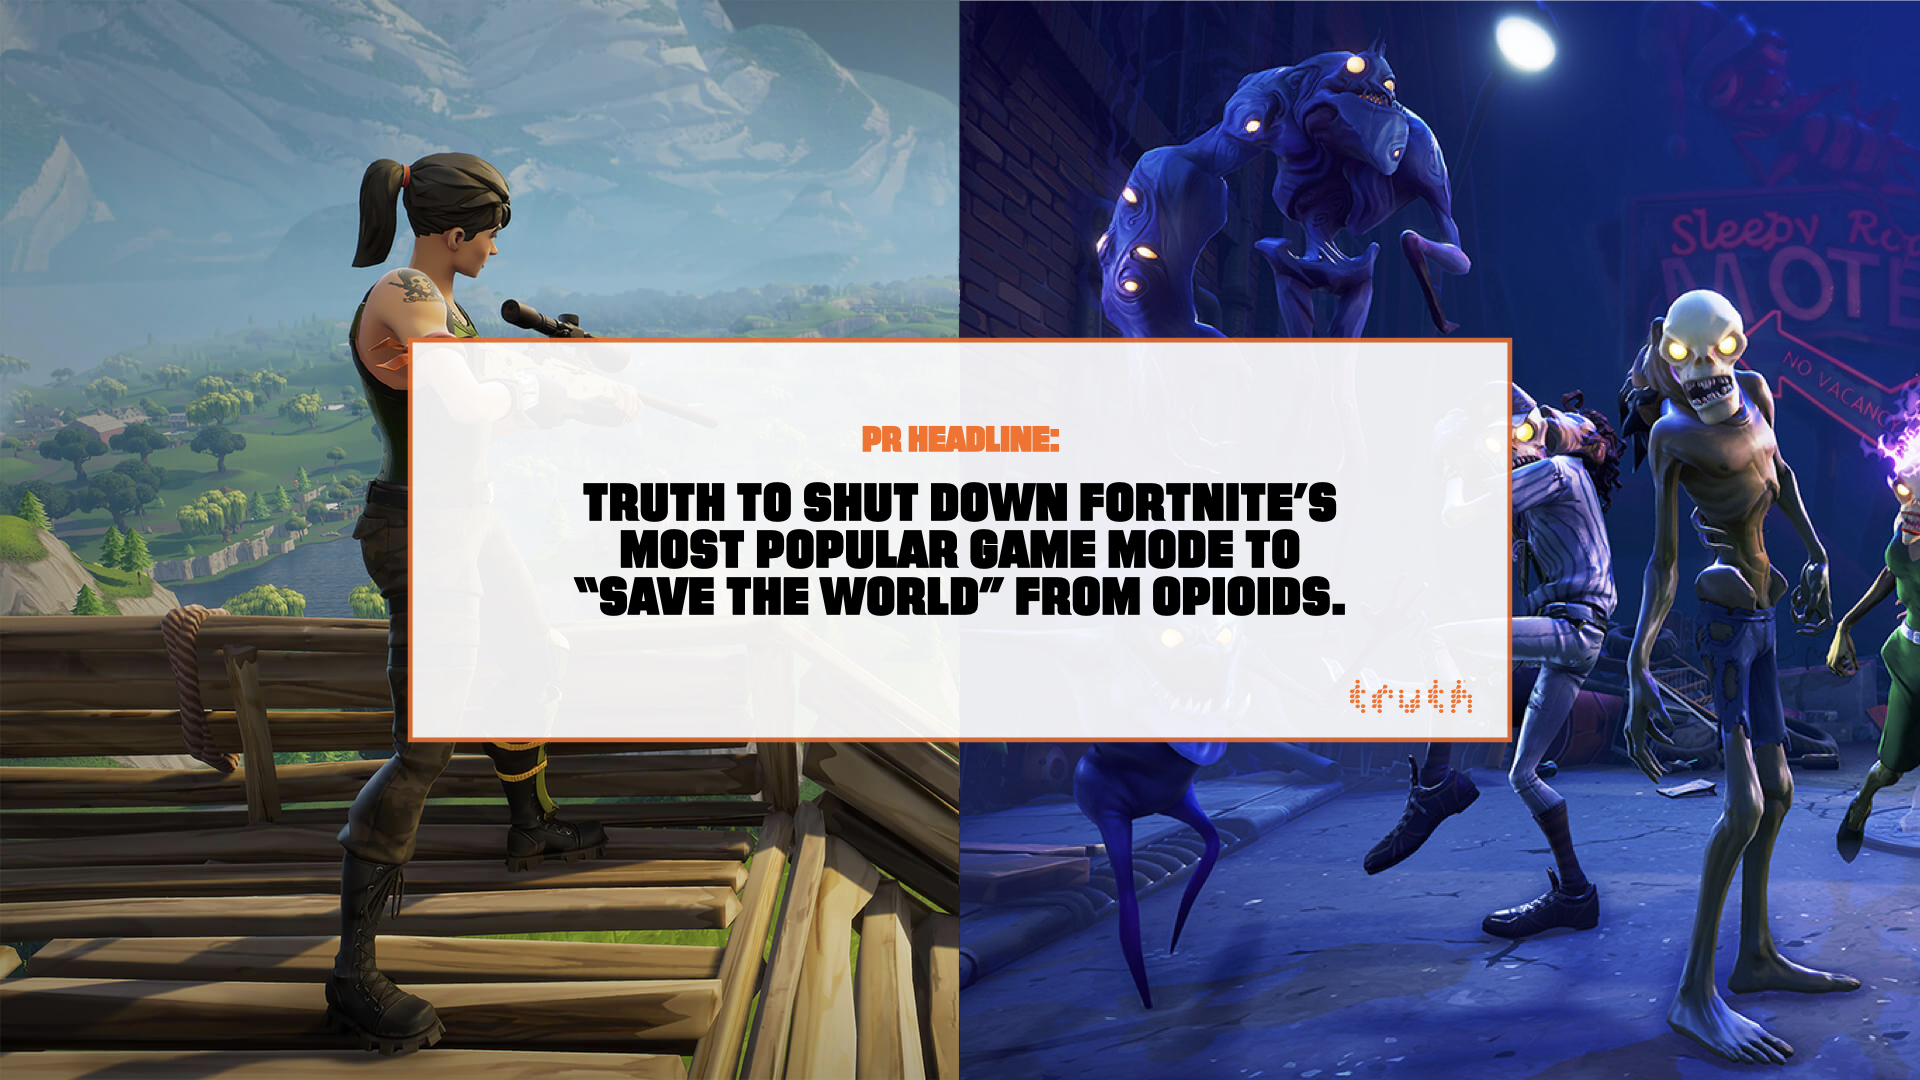 PR Headline: Truth to shut down Fortnite’s most popular game mode to “Save the World” from opioids.